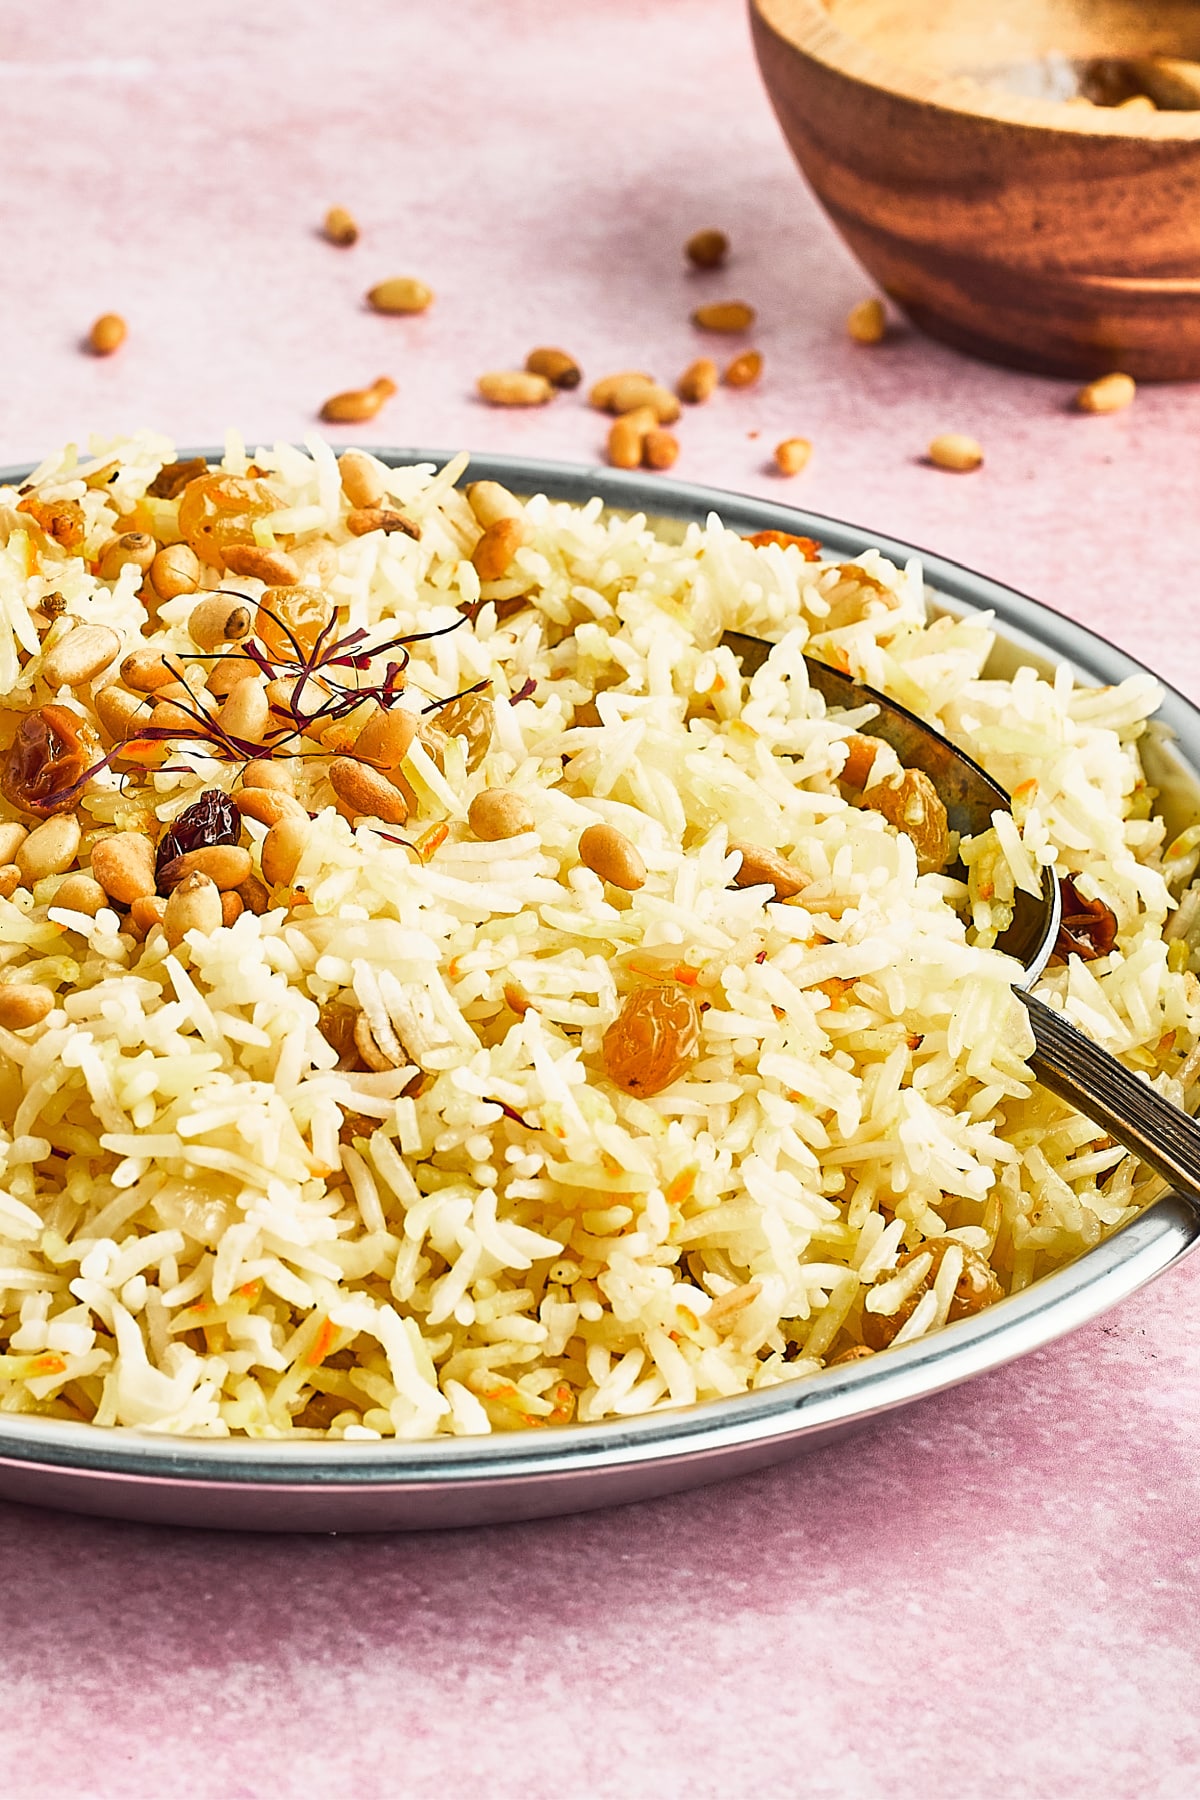 A shallow serving bowl of yellow saffron rice garnished with golden raisins, pine nuts, a cinnamon stick and saffron strands. A small wooden bowl of toasted pine nuts sits to the side of the rice, with pine nuts scattered on the pink surface.